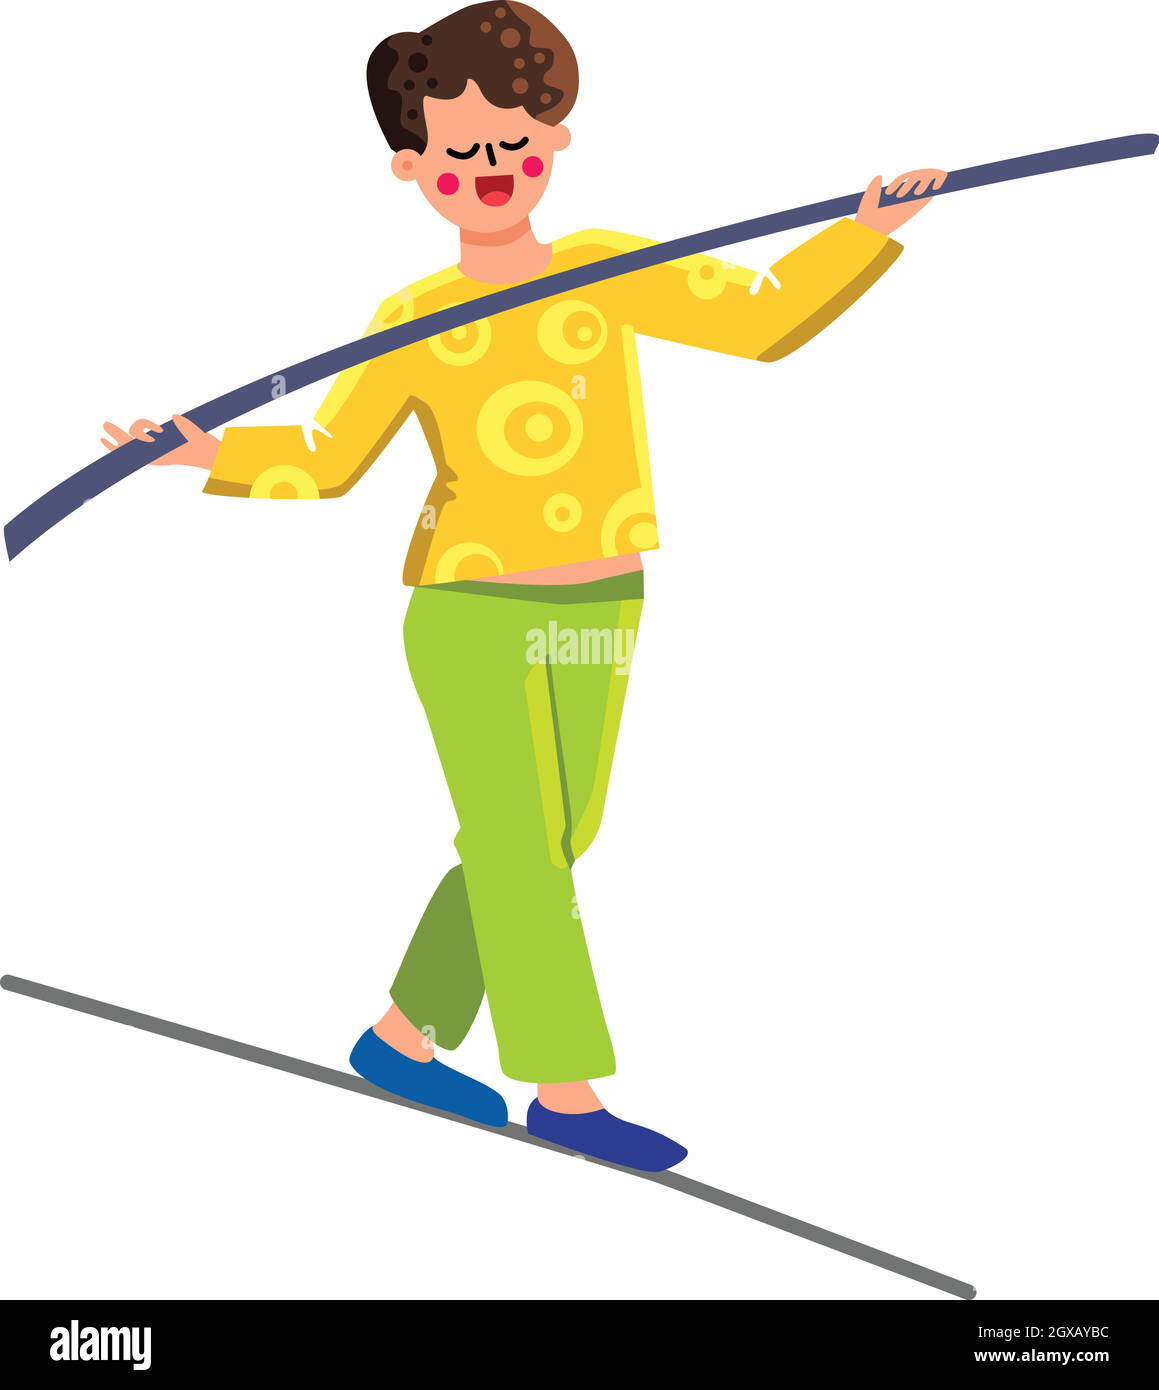 Balancing tightrope Stock Vector Images - Alamy